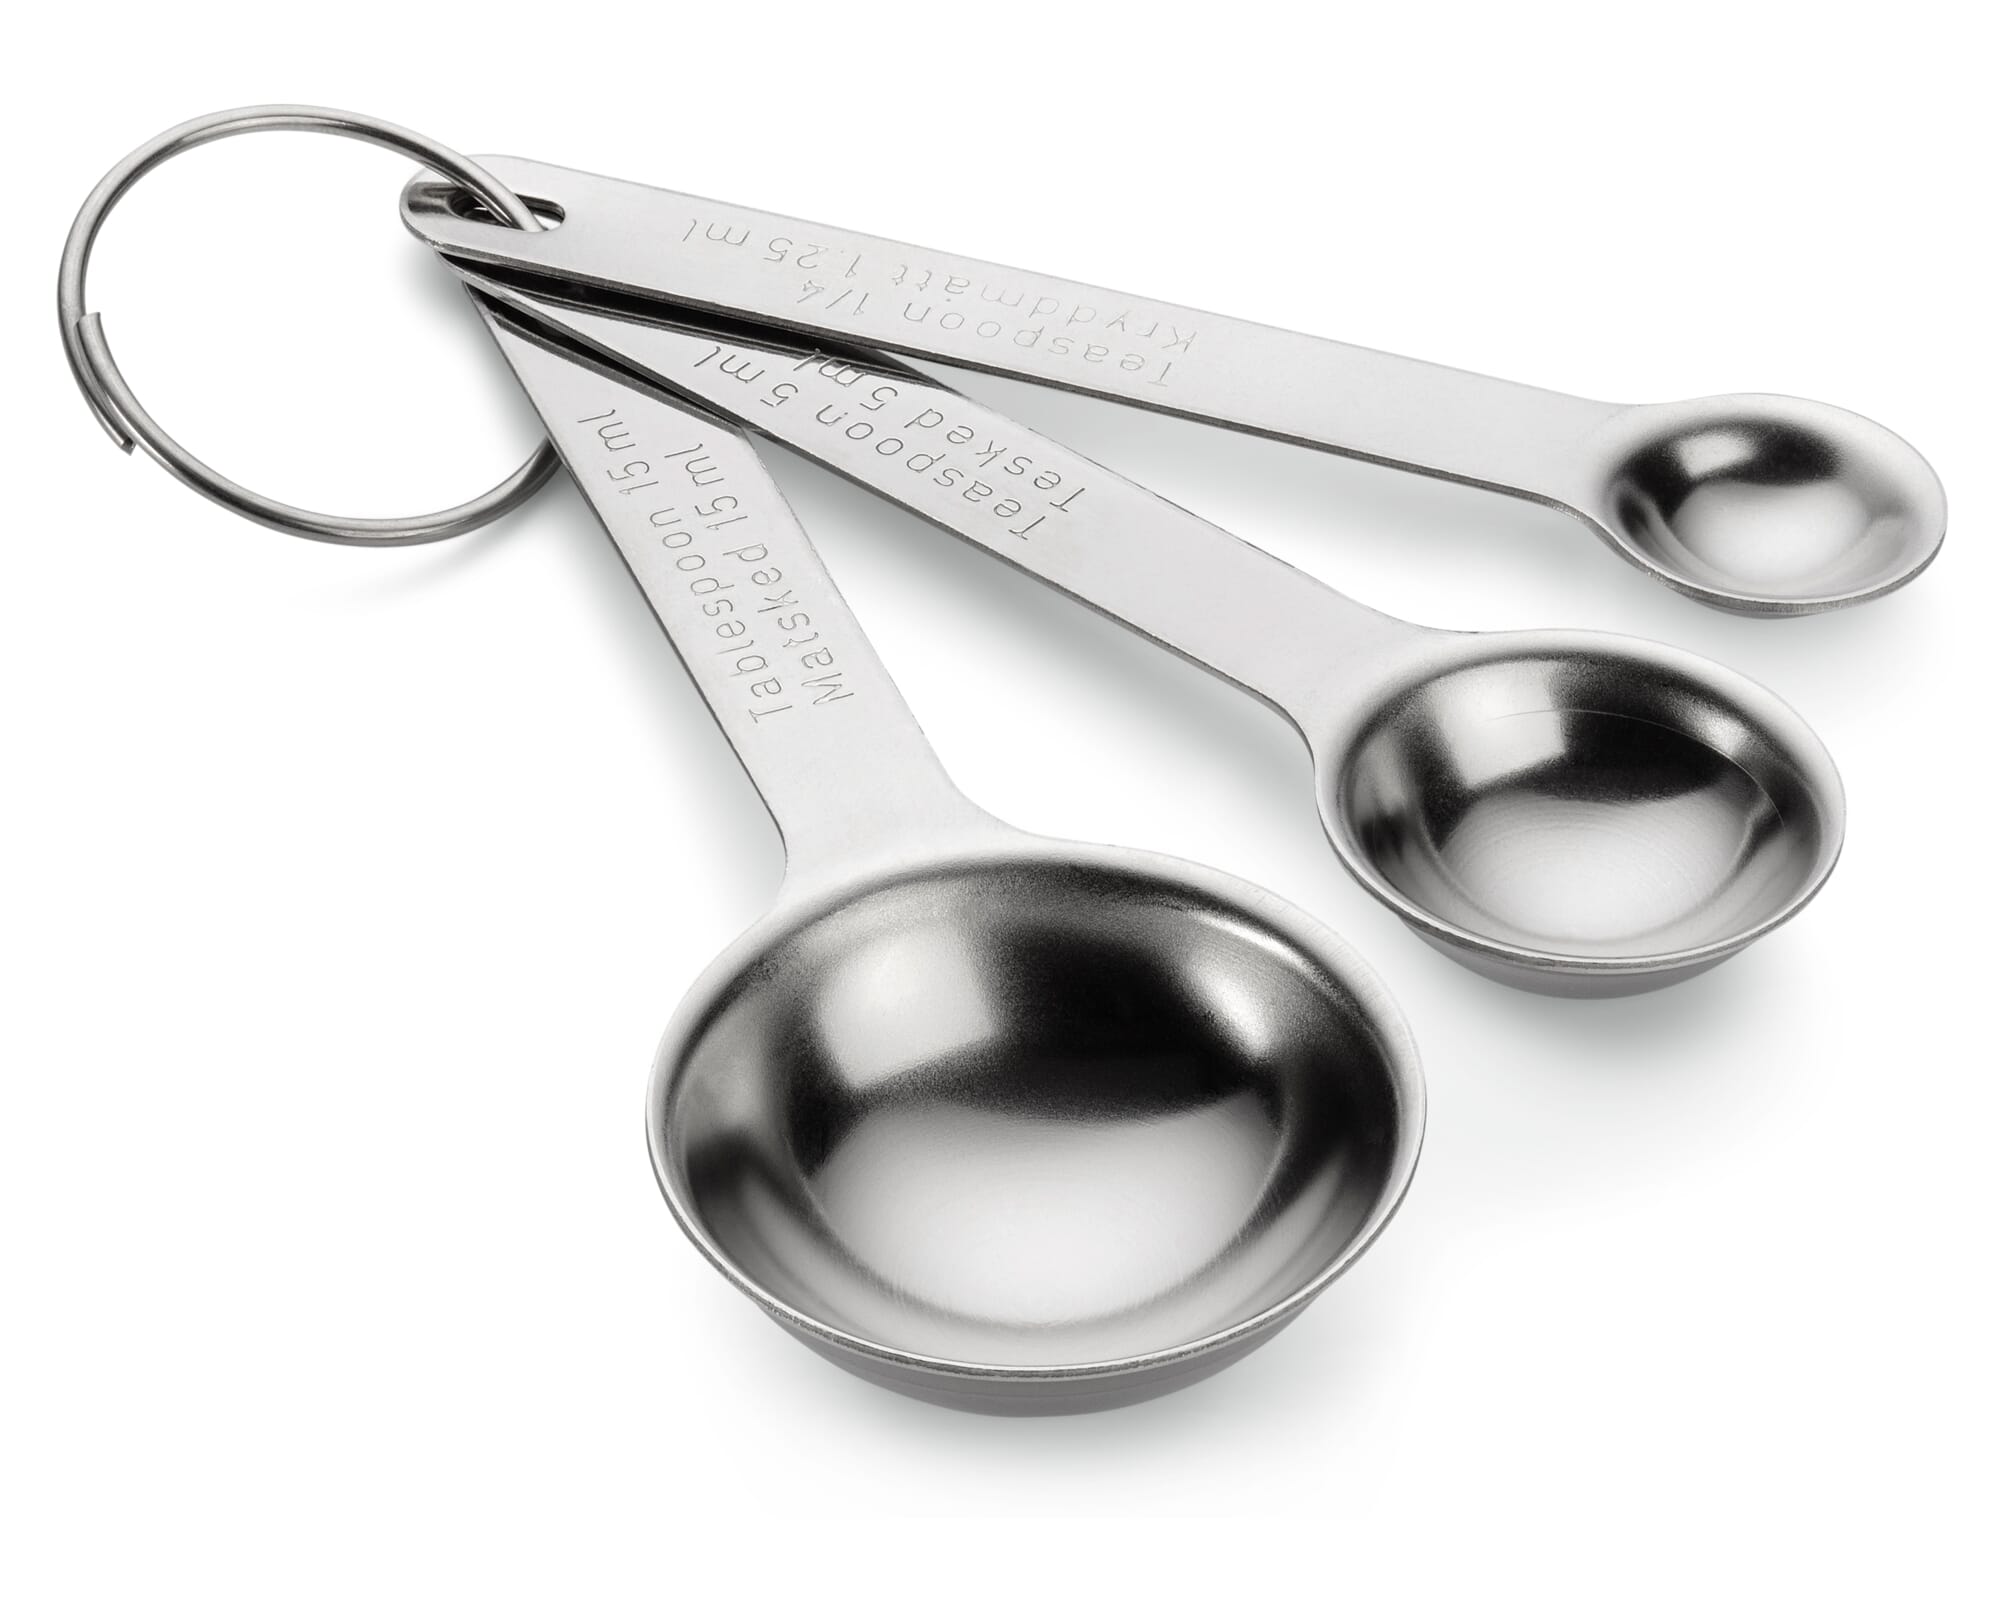 Imprinted 4 Piece Stainless Steel Measuring Spoons, Household